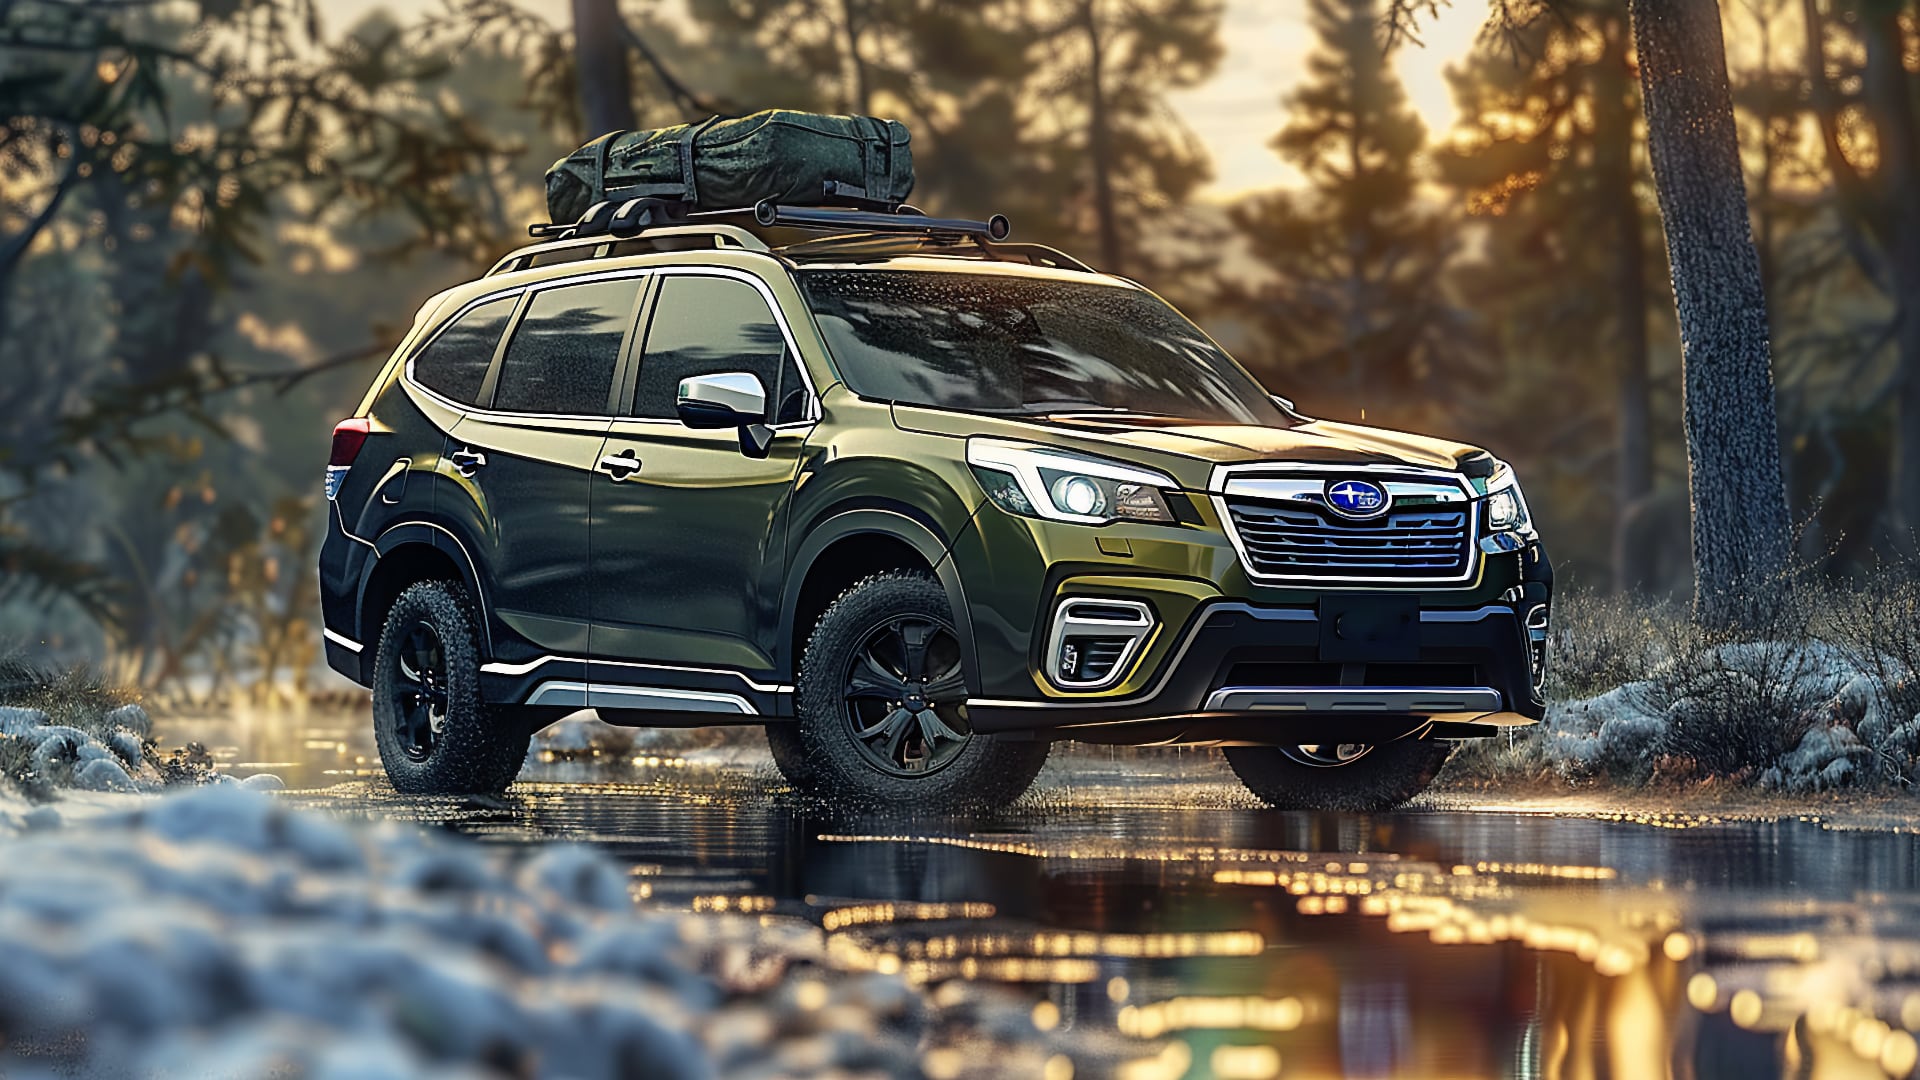 The 2020 Subaru Forester is cruising through the woods.